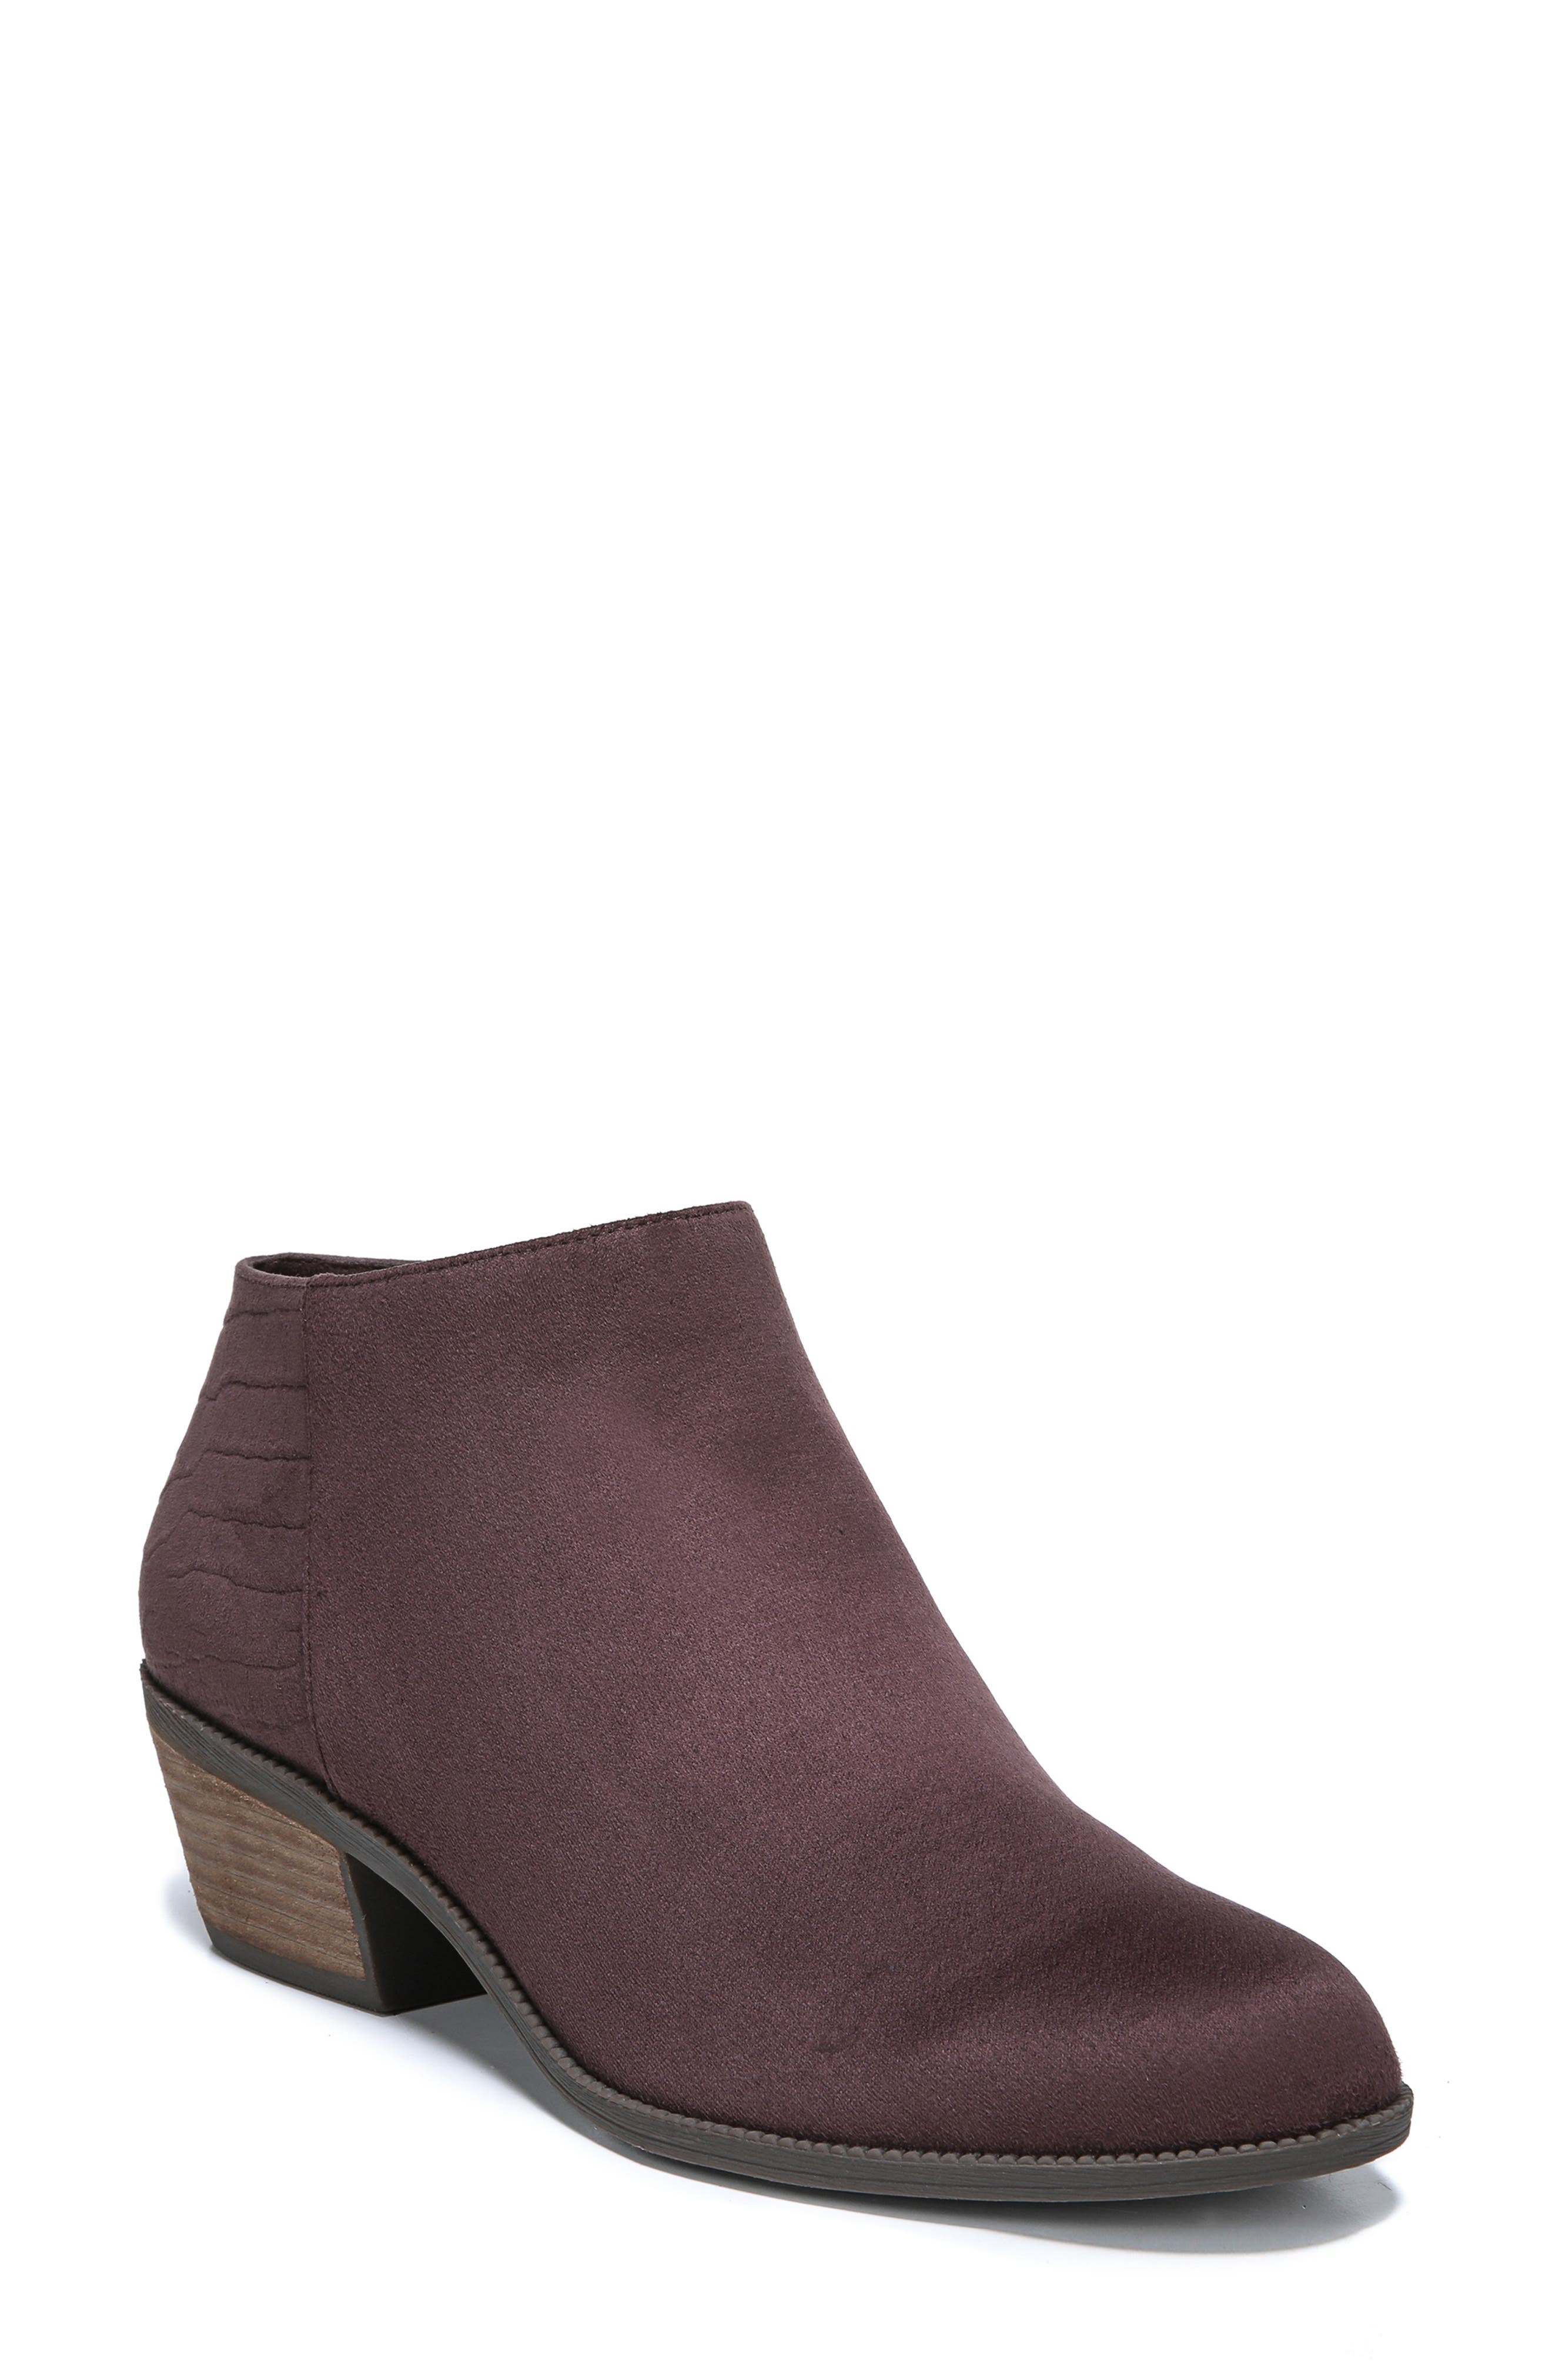 UPC 736703894317 product image for Women's Dr. Scholl'S Brendel Bootie, Size 10 M - Purple | upcitemdb.com